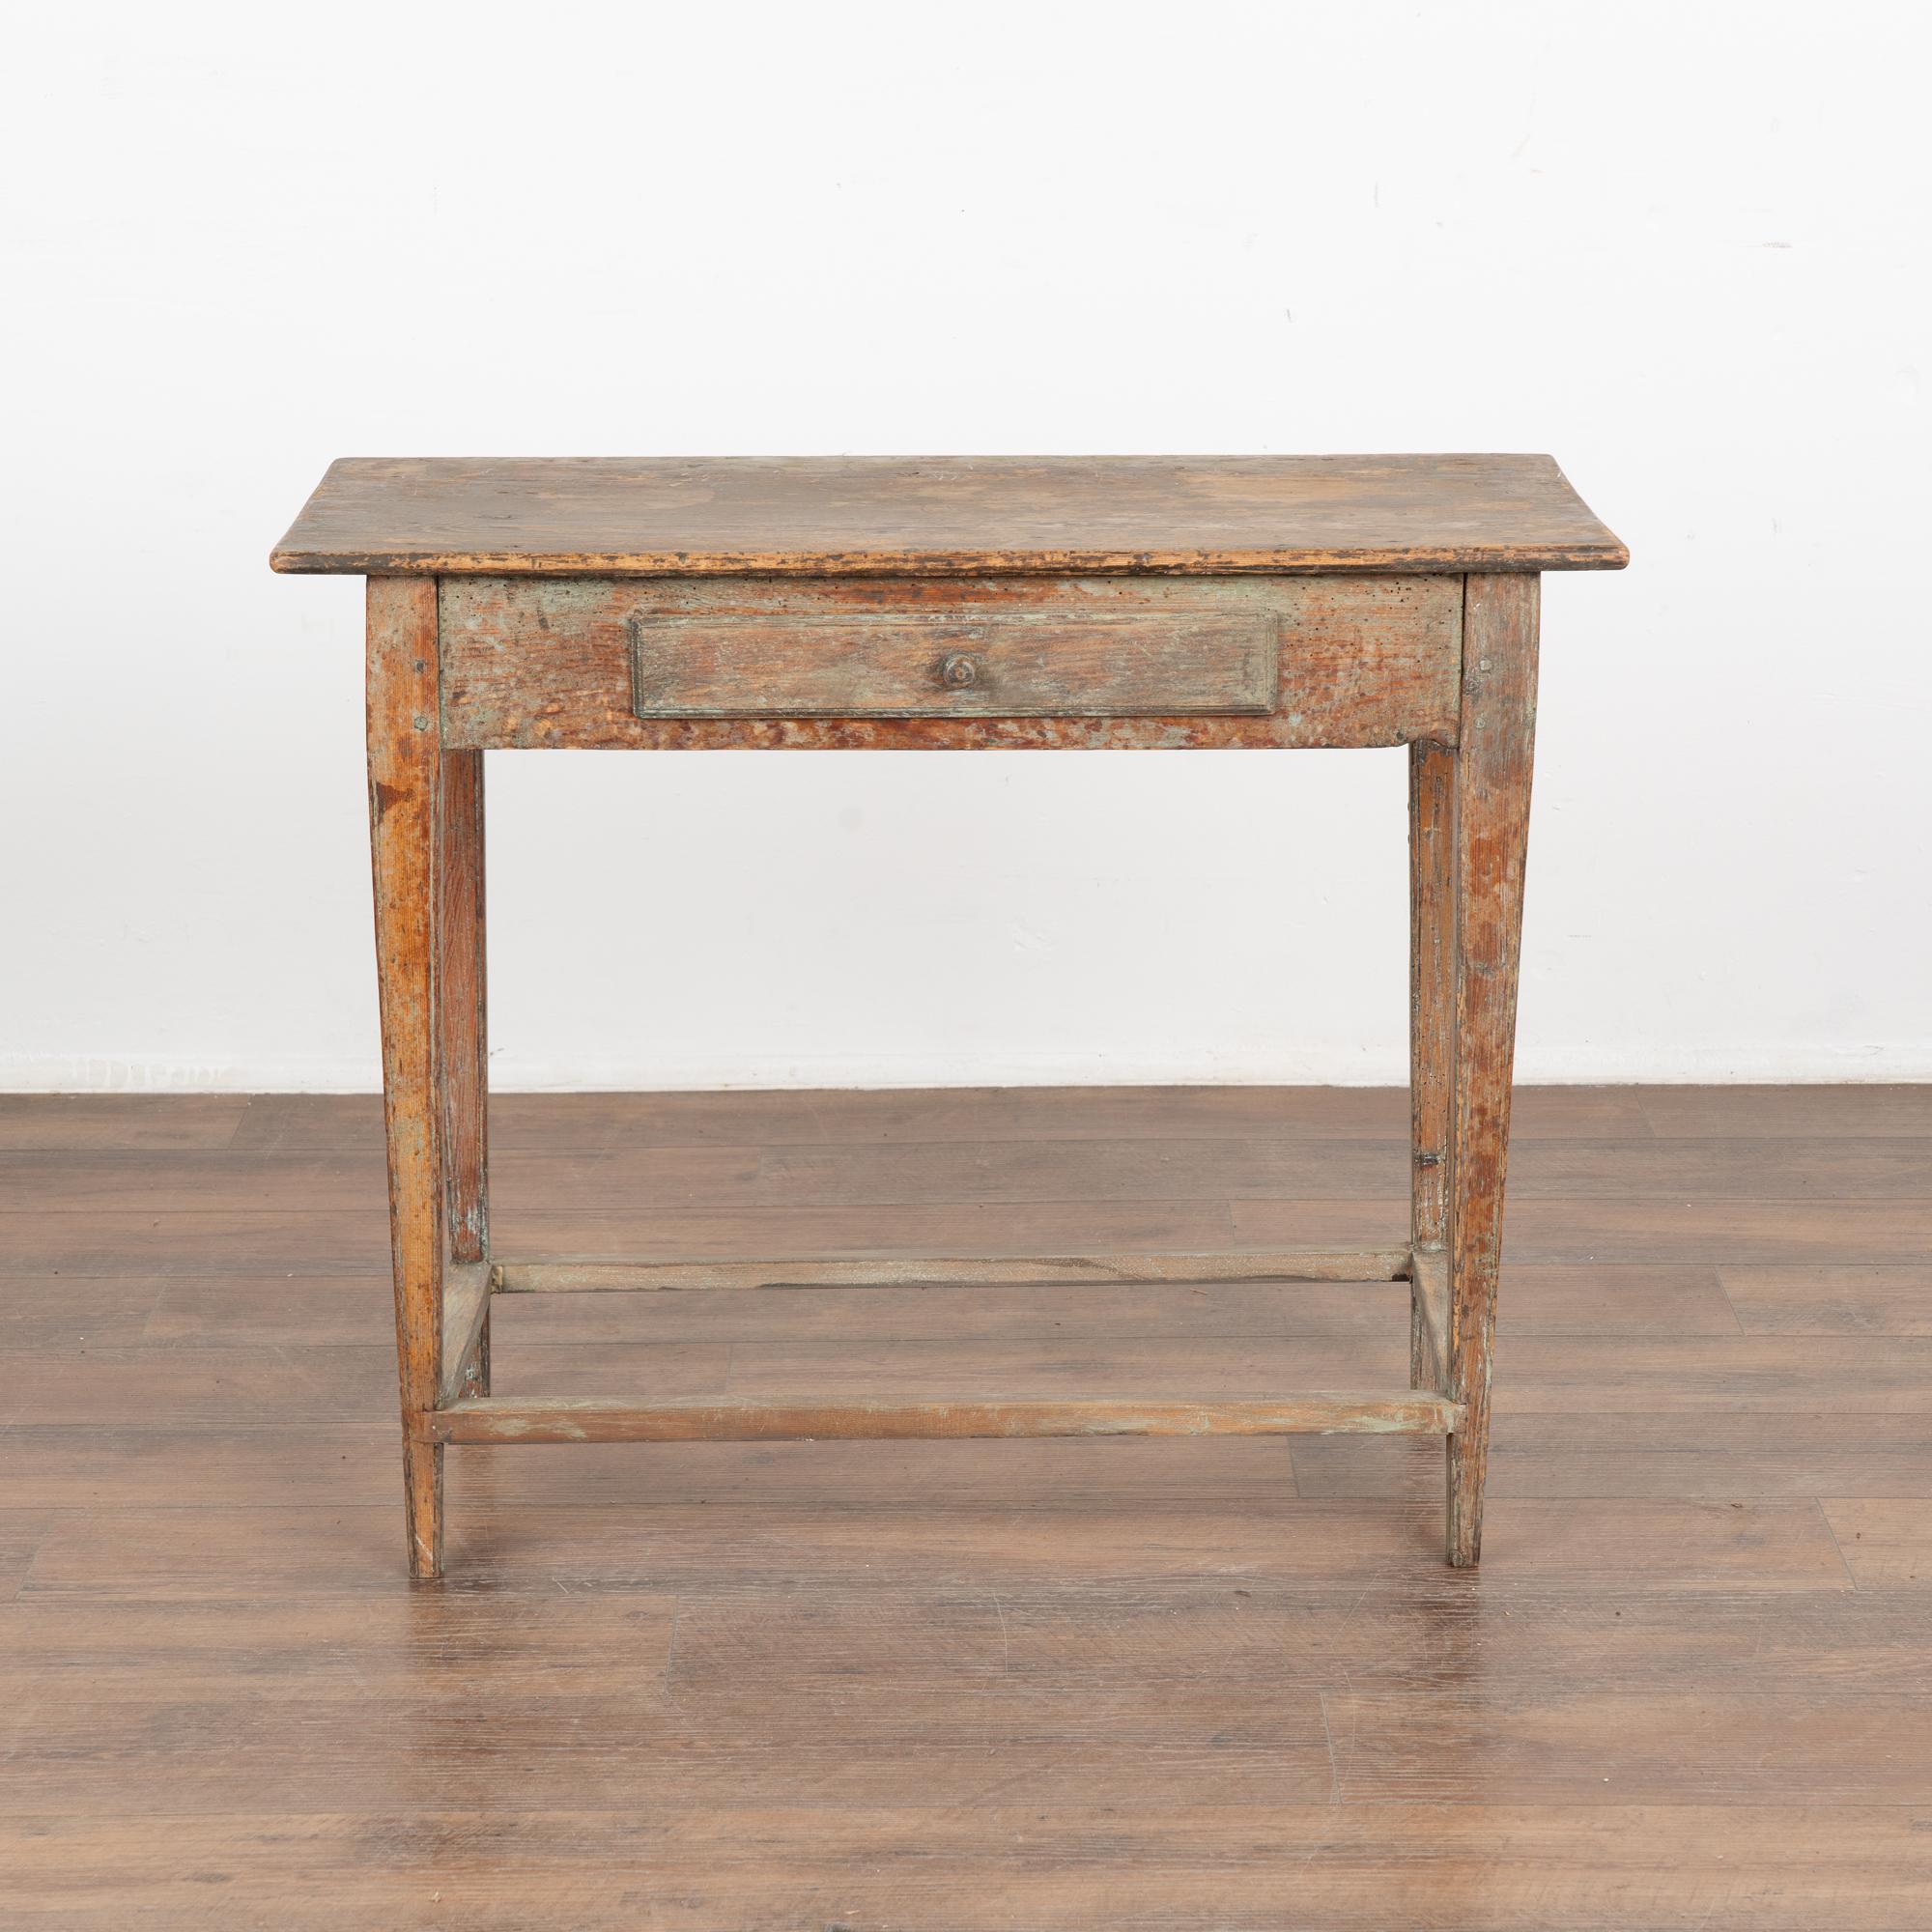 Swedish Original Painted Pine Side Table With Drawer, Sweden circa 1820-40